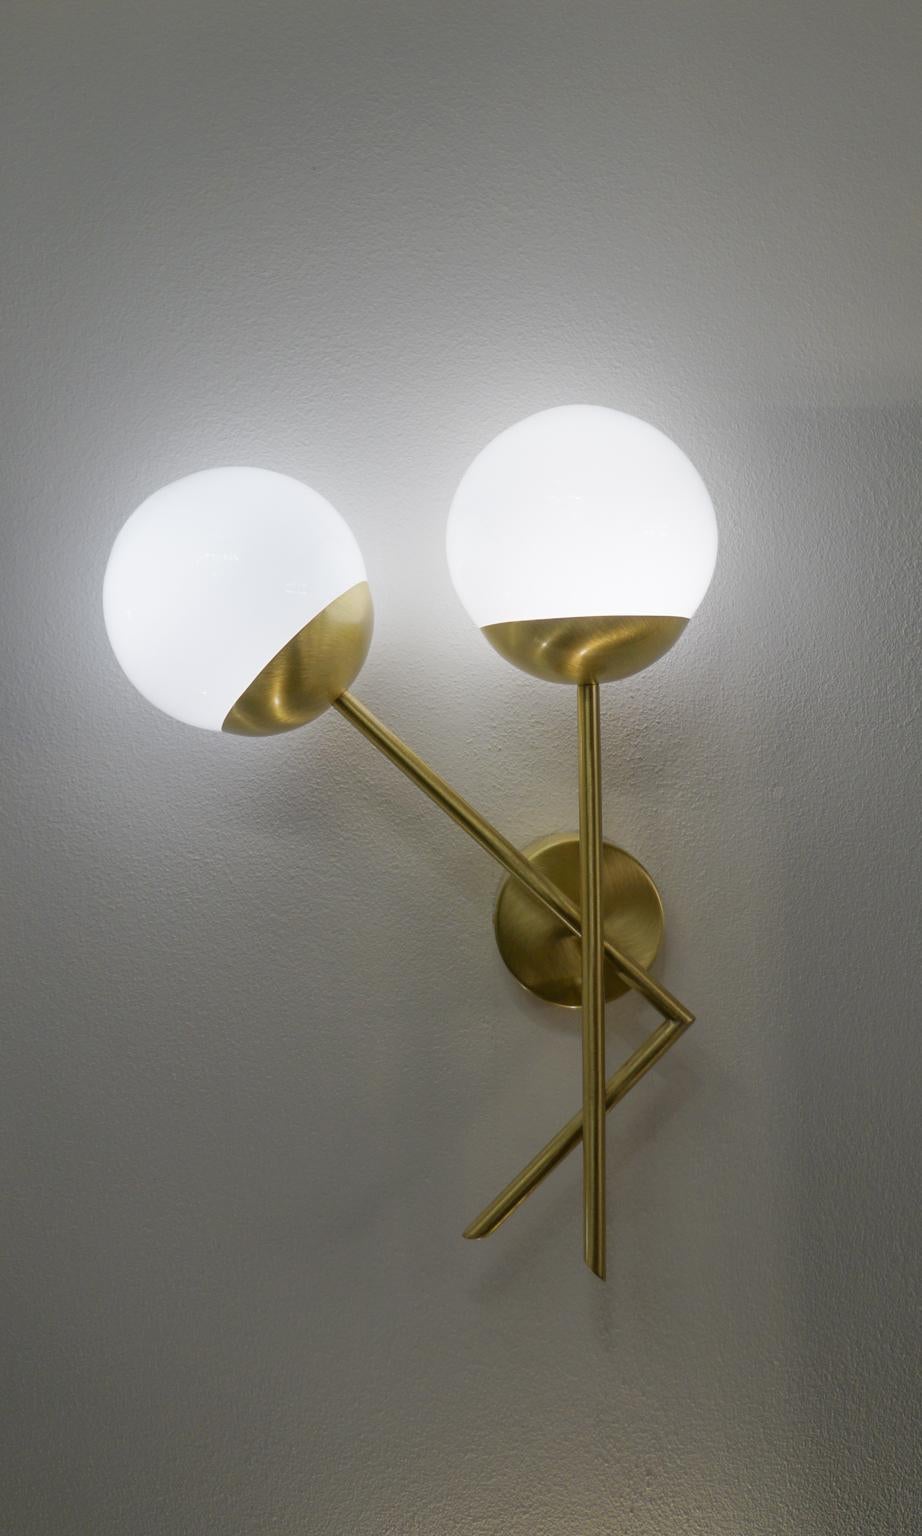 Attributed Stilnovo Mid-Century Modern White Pair of Murano Glass Wall Sconces For Sale 2